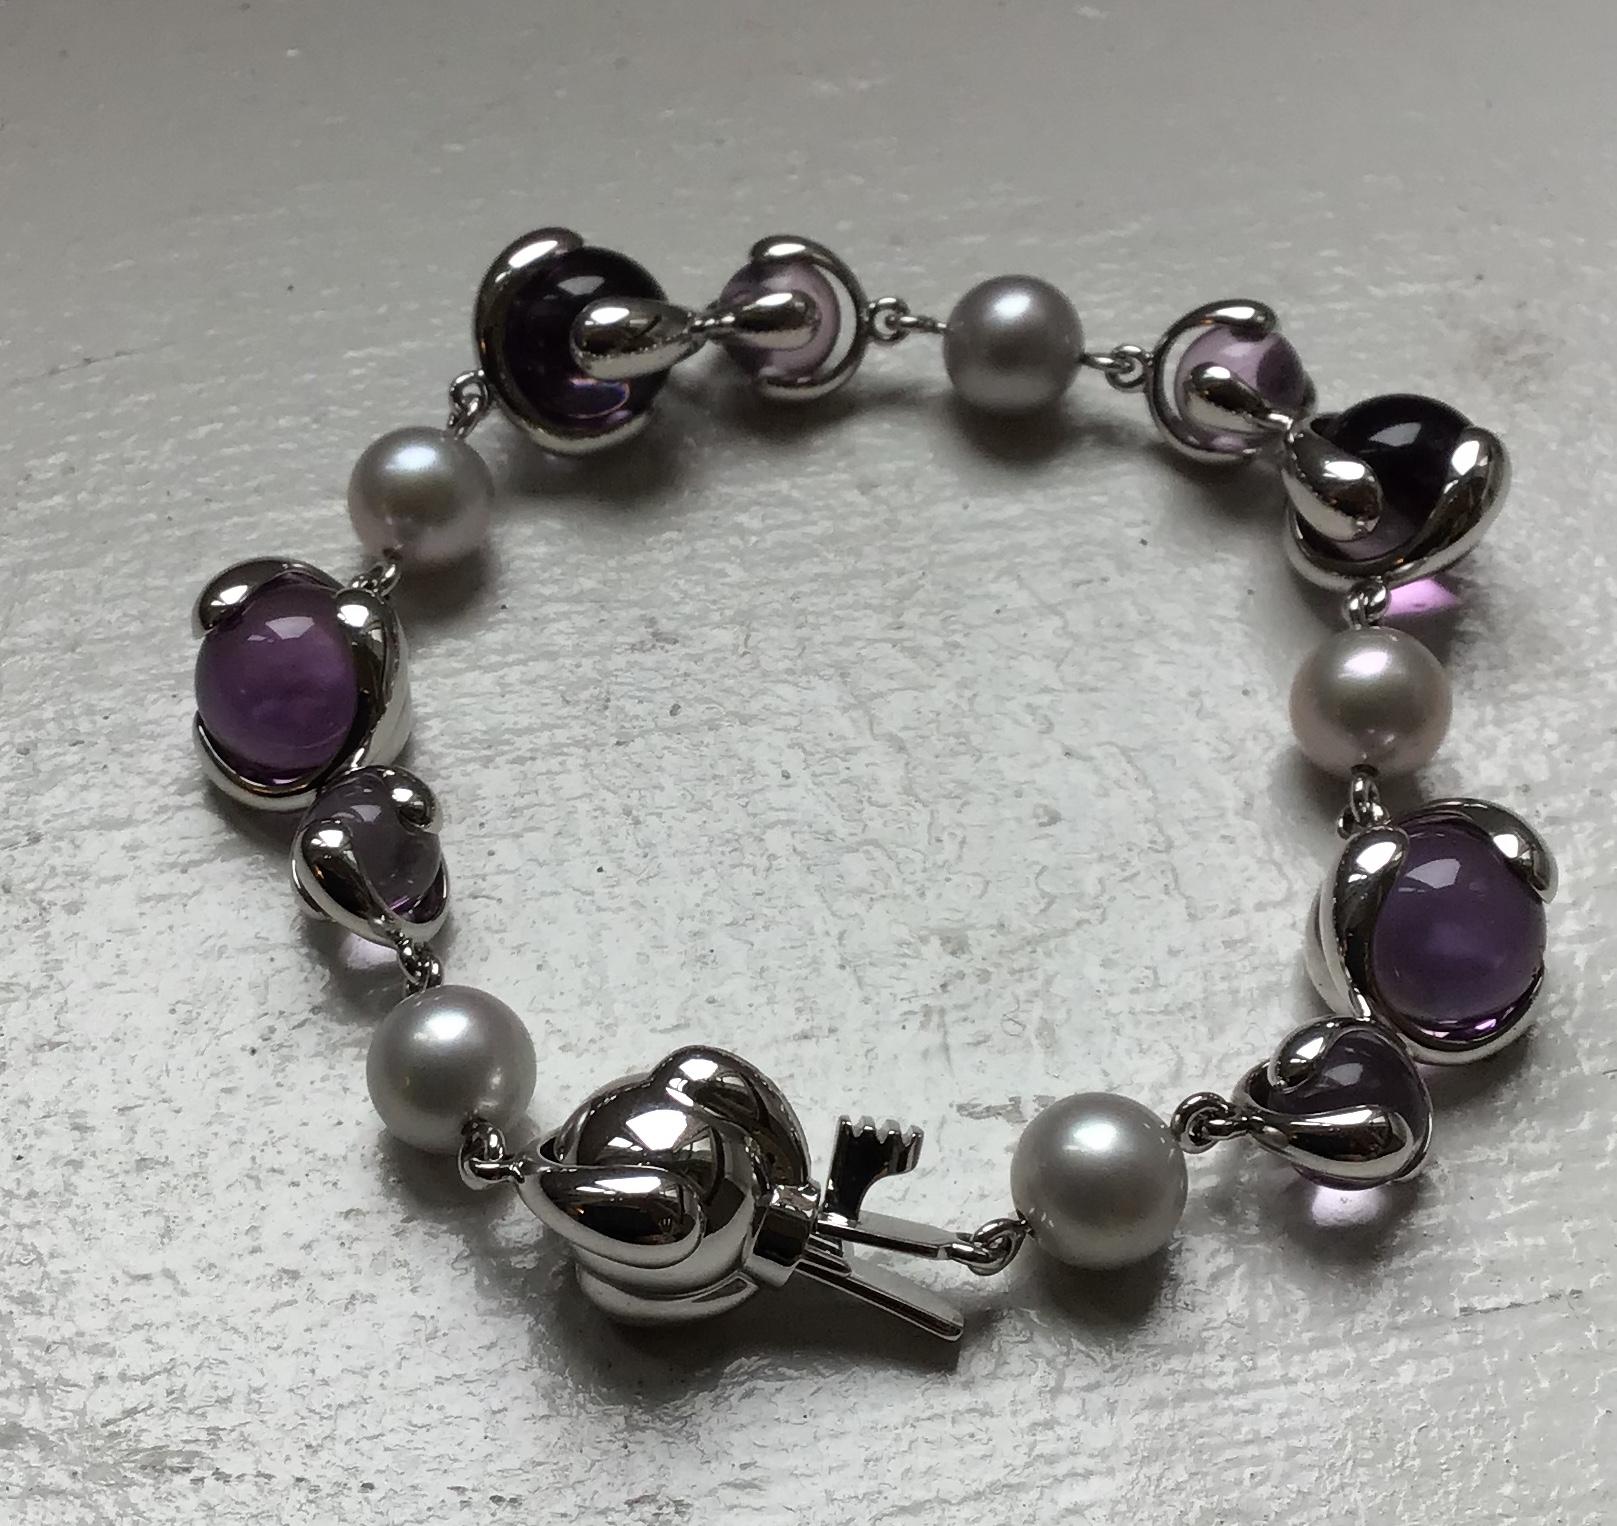 18-Karat Gold Cardan Bracelet with 35.82 ct. Amethyst Beads, and 17.20 ct. Grey Pearls with box clasp closure.

Polished 18-karat white gold hardware and frame.

Signed Marina B, Made in Italy and numbered 580059